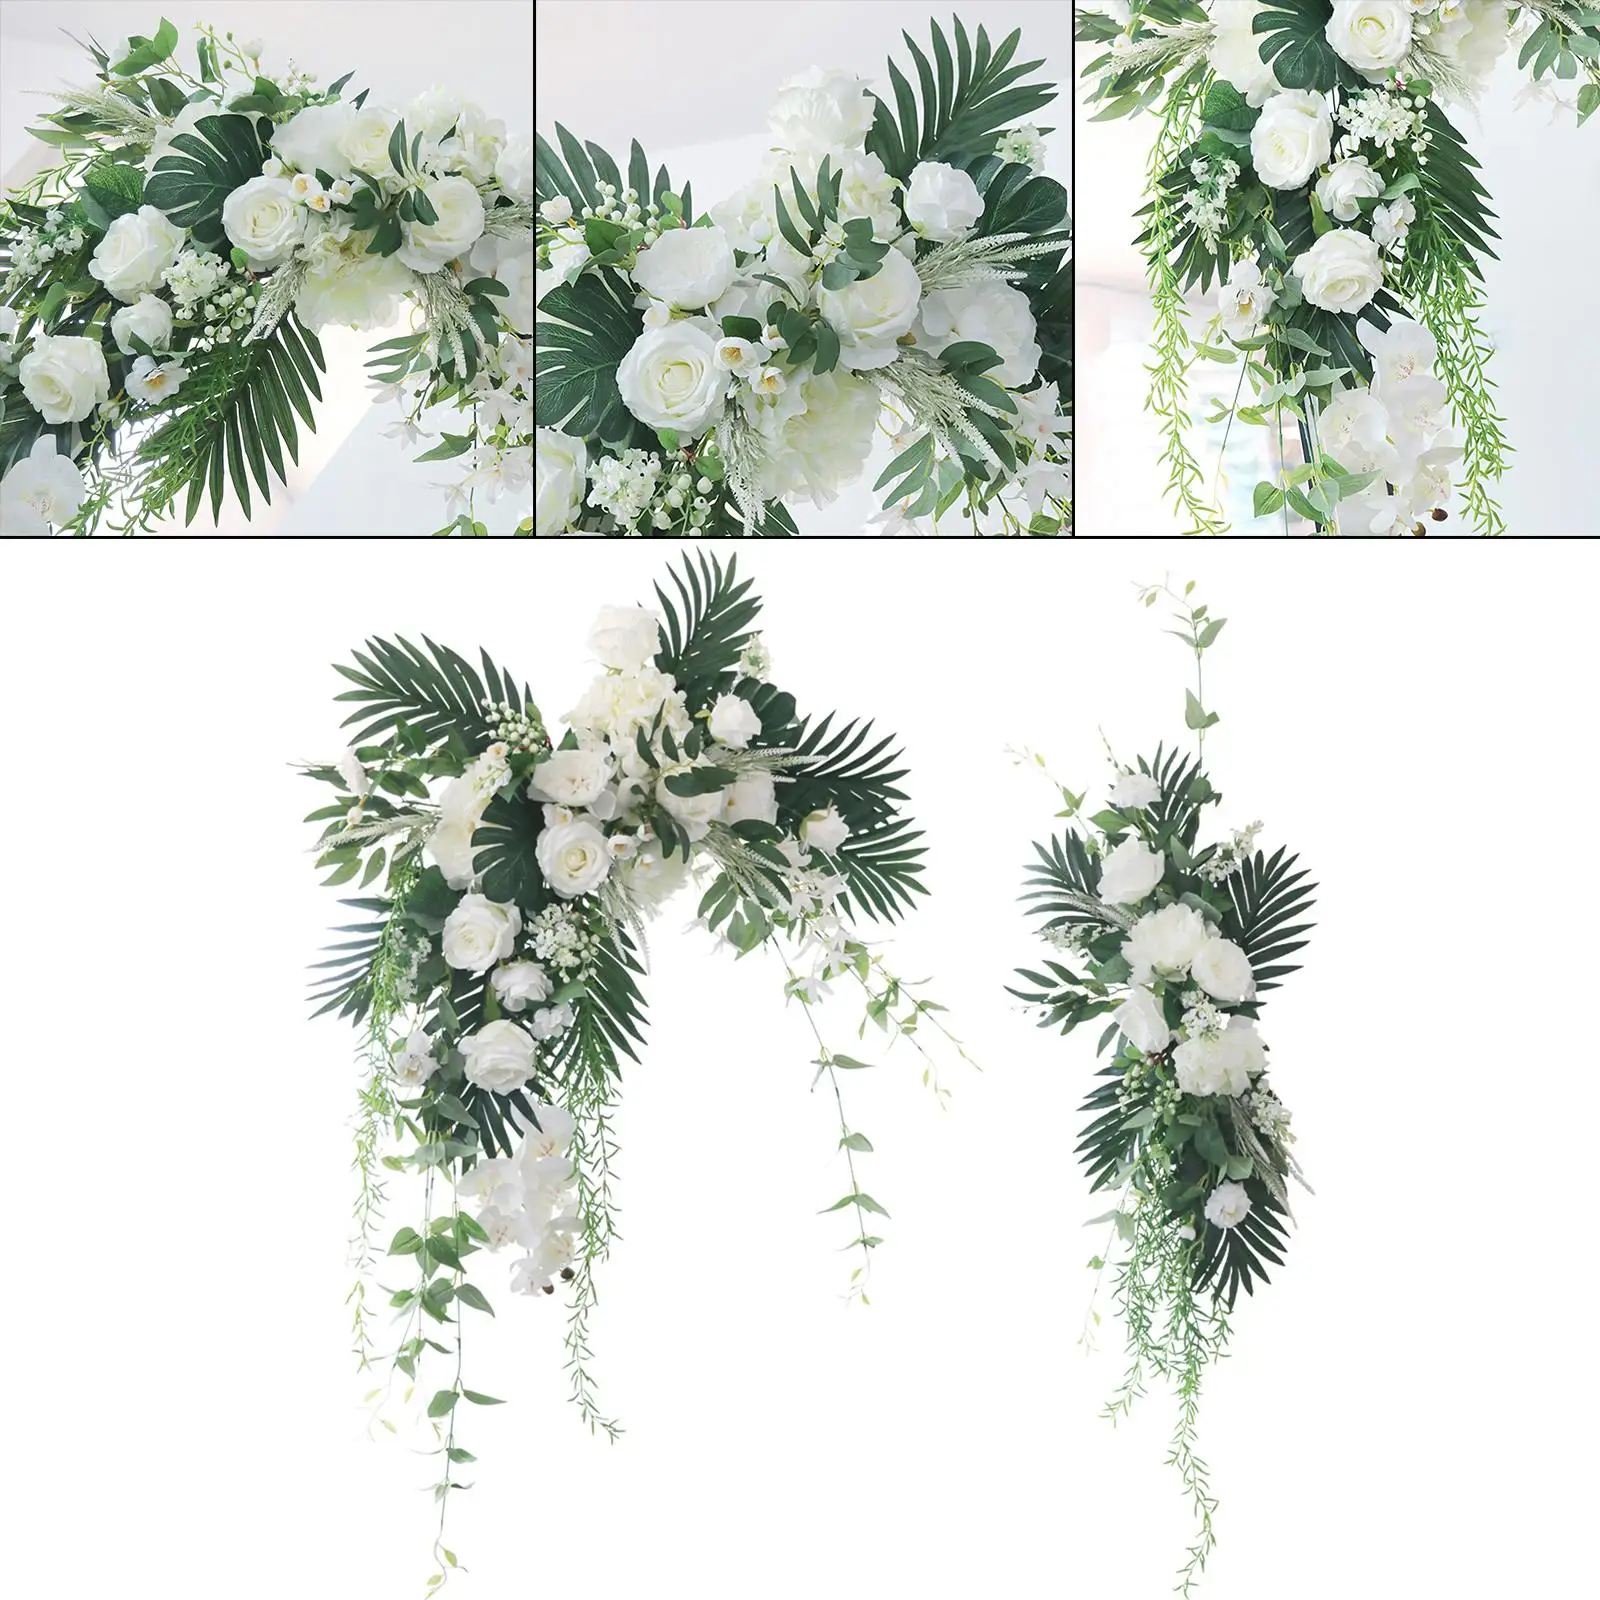 2x Wedding Arch Flowers Kit White Rose Artificial Greenery Eucalyptus Leaves Flower Floral Swags for Wall